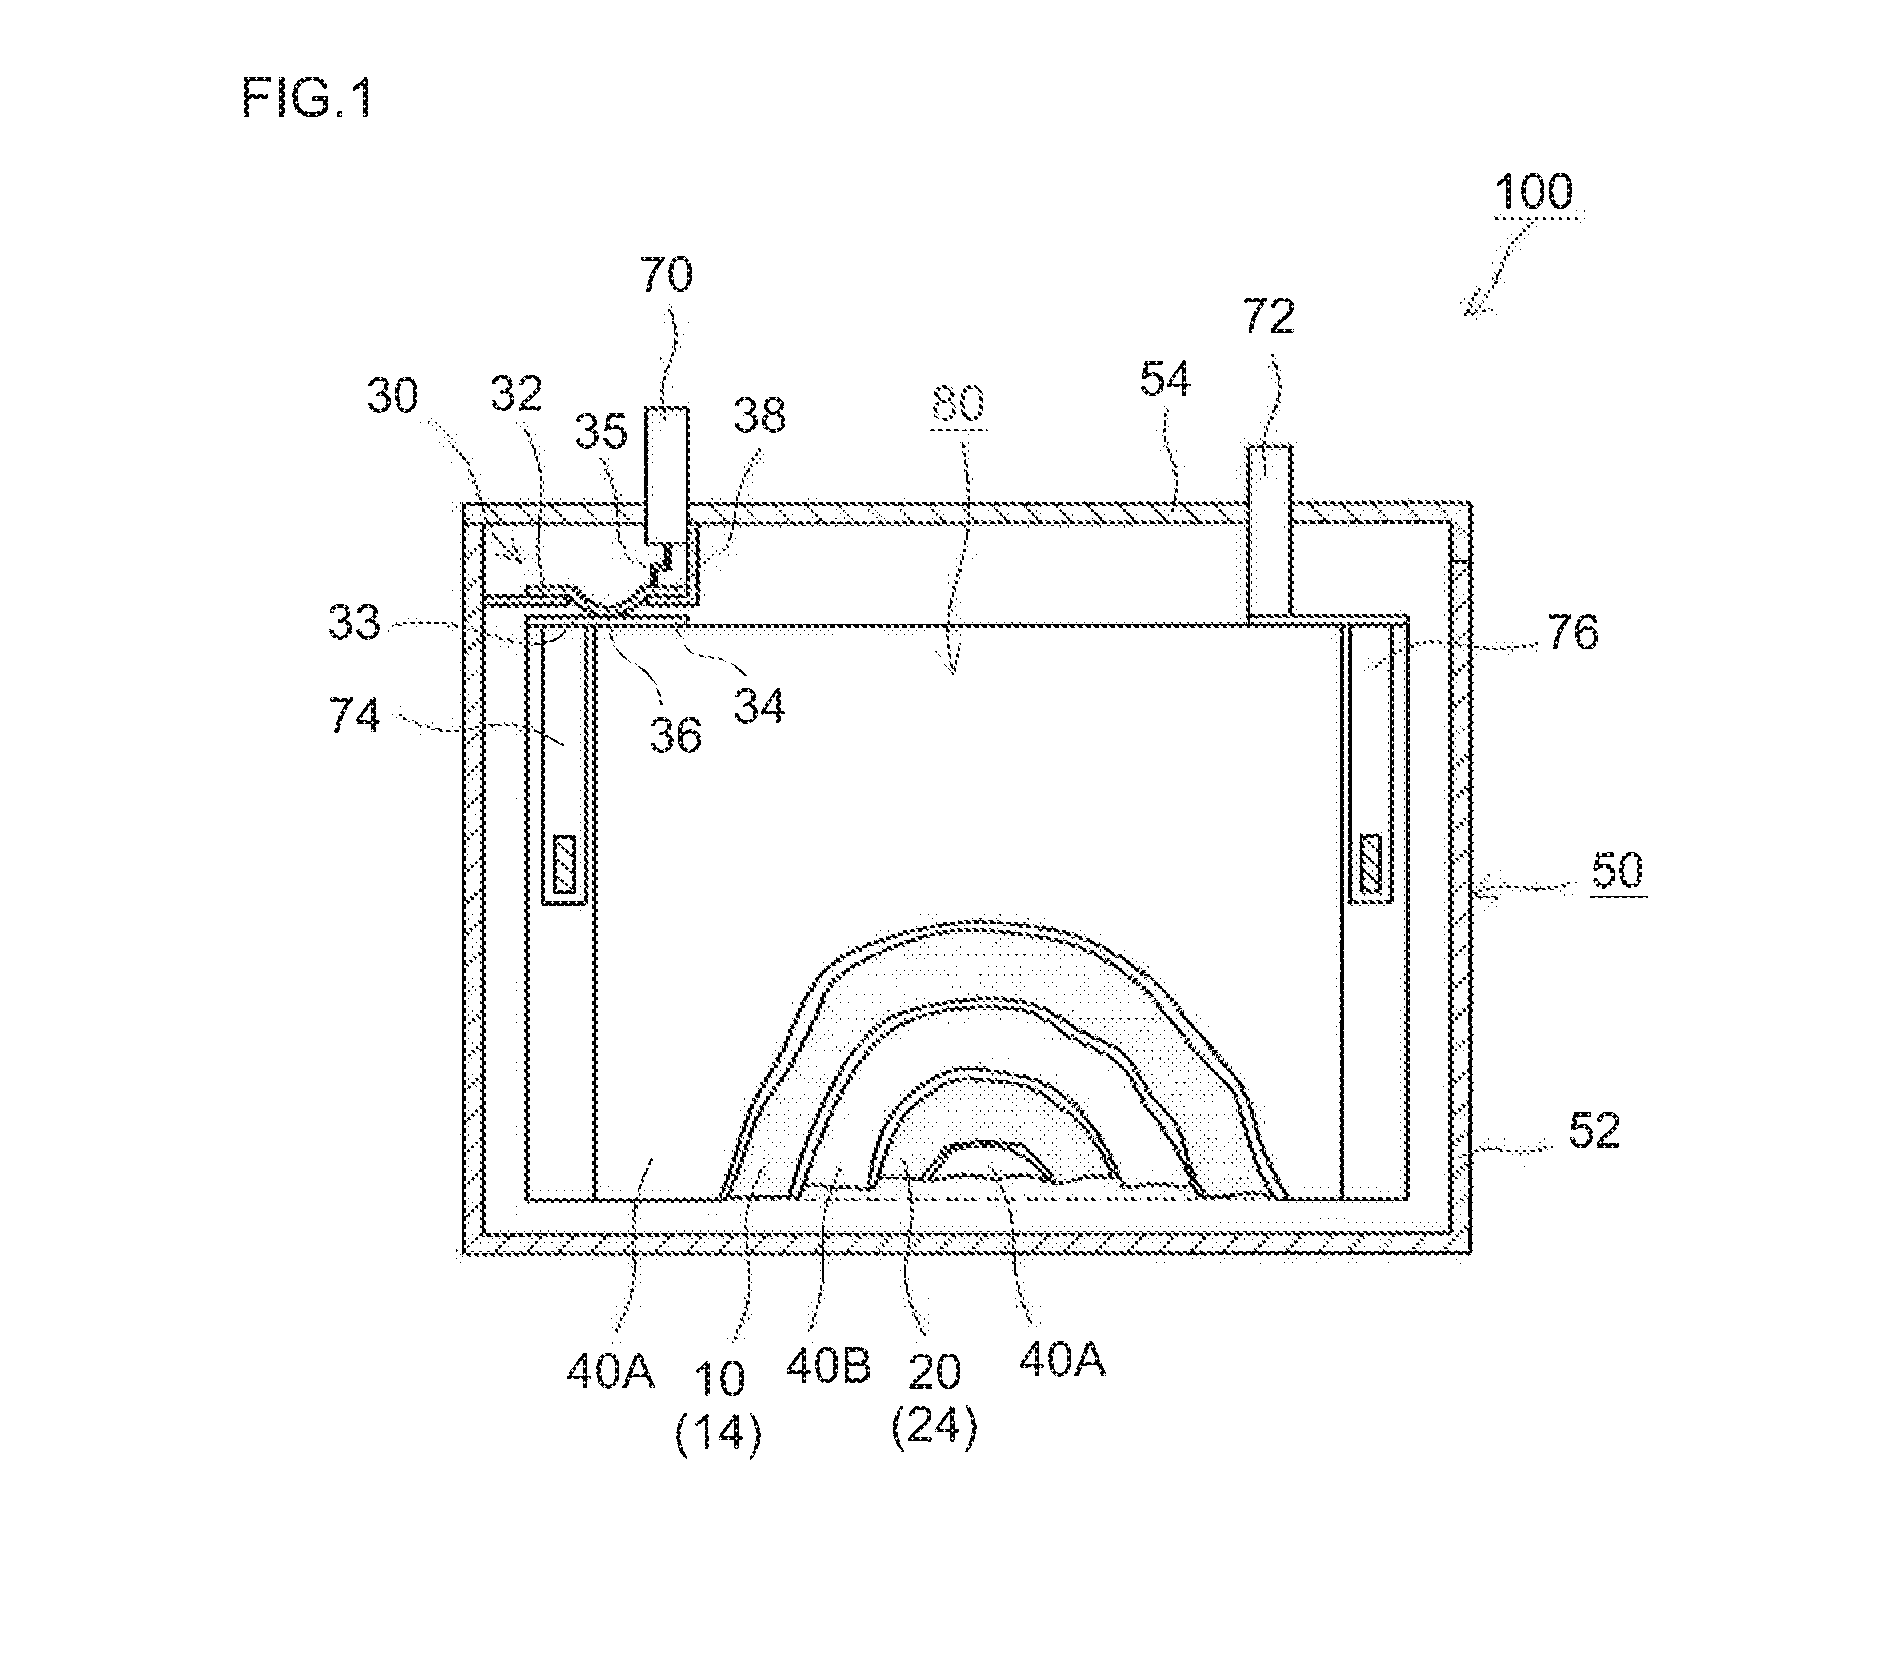 Non-aqueous electrolyte secondary battery and method for producing same